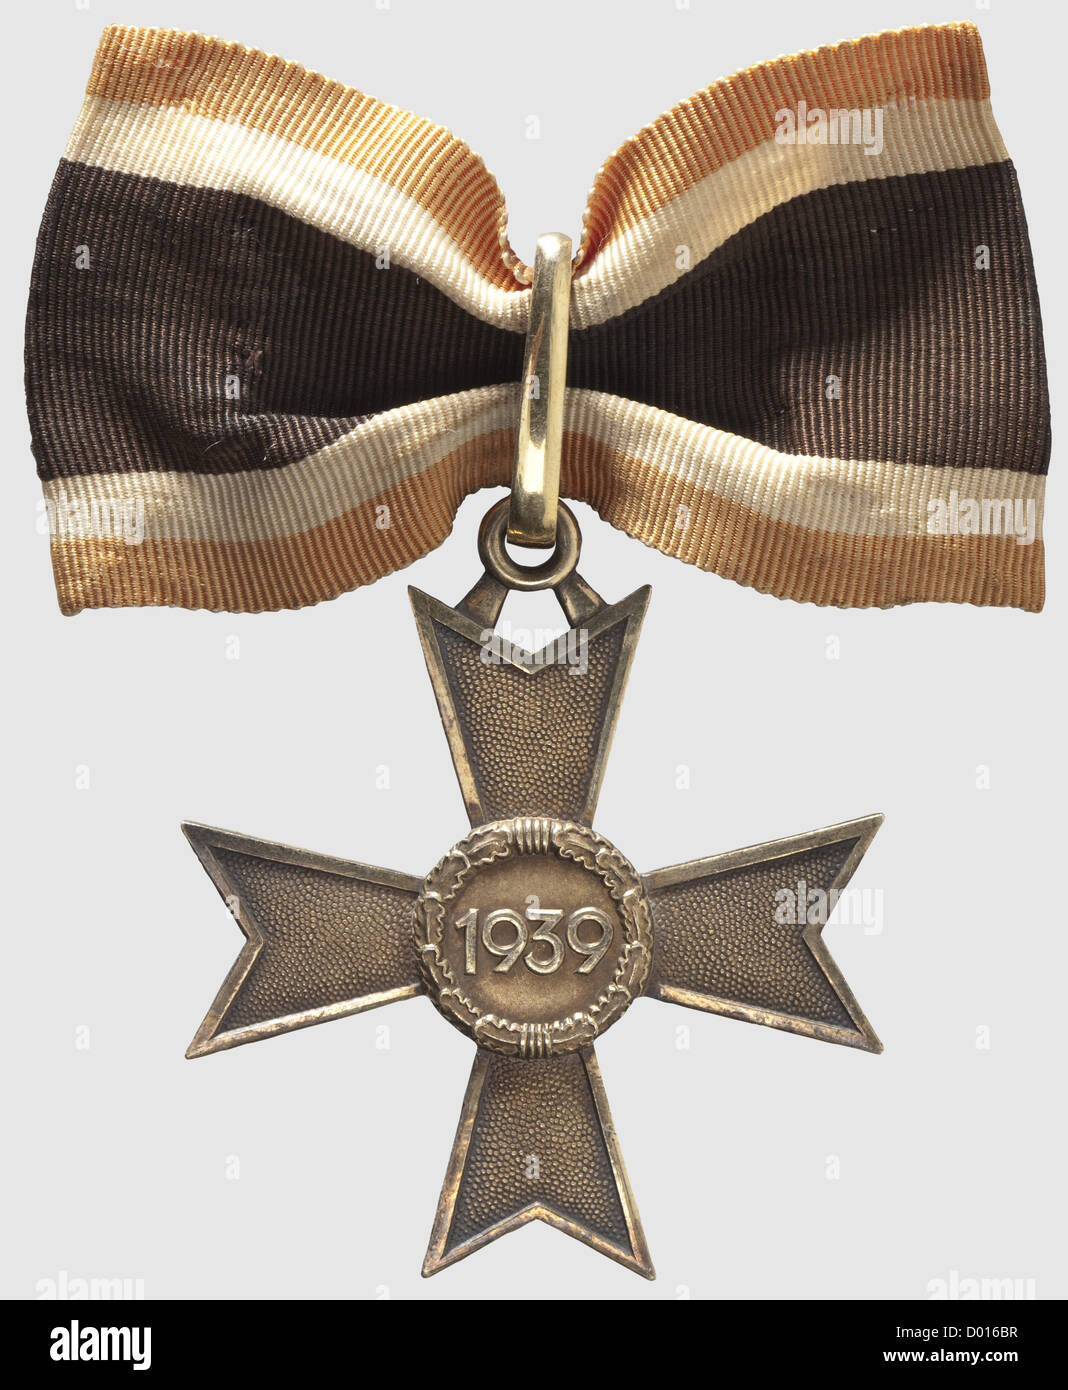 A Knight's Cross of the War Merit Cross of 1939 in Gold,Gold-plated silver,the edges and raised areas polished.Smooth,closed suspension ring,the lower cross-arm punched '900' and '20'(for Zimmermann,Pforzheim).Typical shallow,roughly de-burred Zimmermann issue.Dimensions ca.53 x 59.8 mm,weight 30.5 g.With a ribbon segment ca.80 mm in length(Nie 7.04.01).The gold class was instituted on 8 July 1944 and only produced in very small numbers.Just two bestowals are known to have occurred.This example comes from the awards hoard hidden by the Orders ,Additional-Rights-Clearences-Not Available Stock Photo